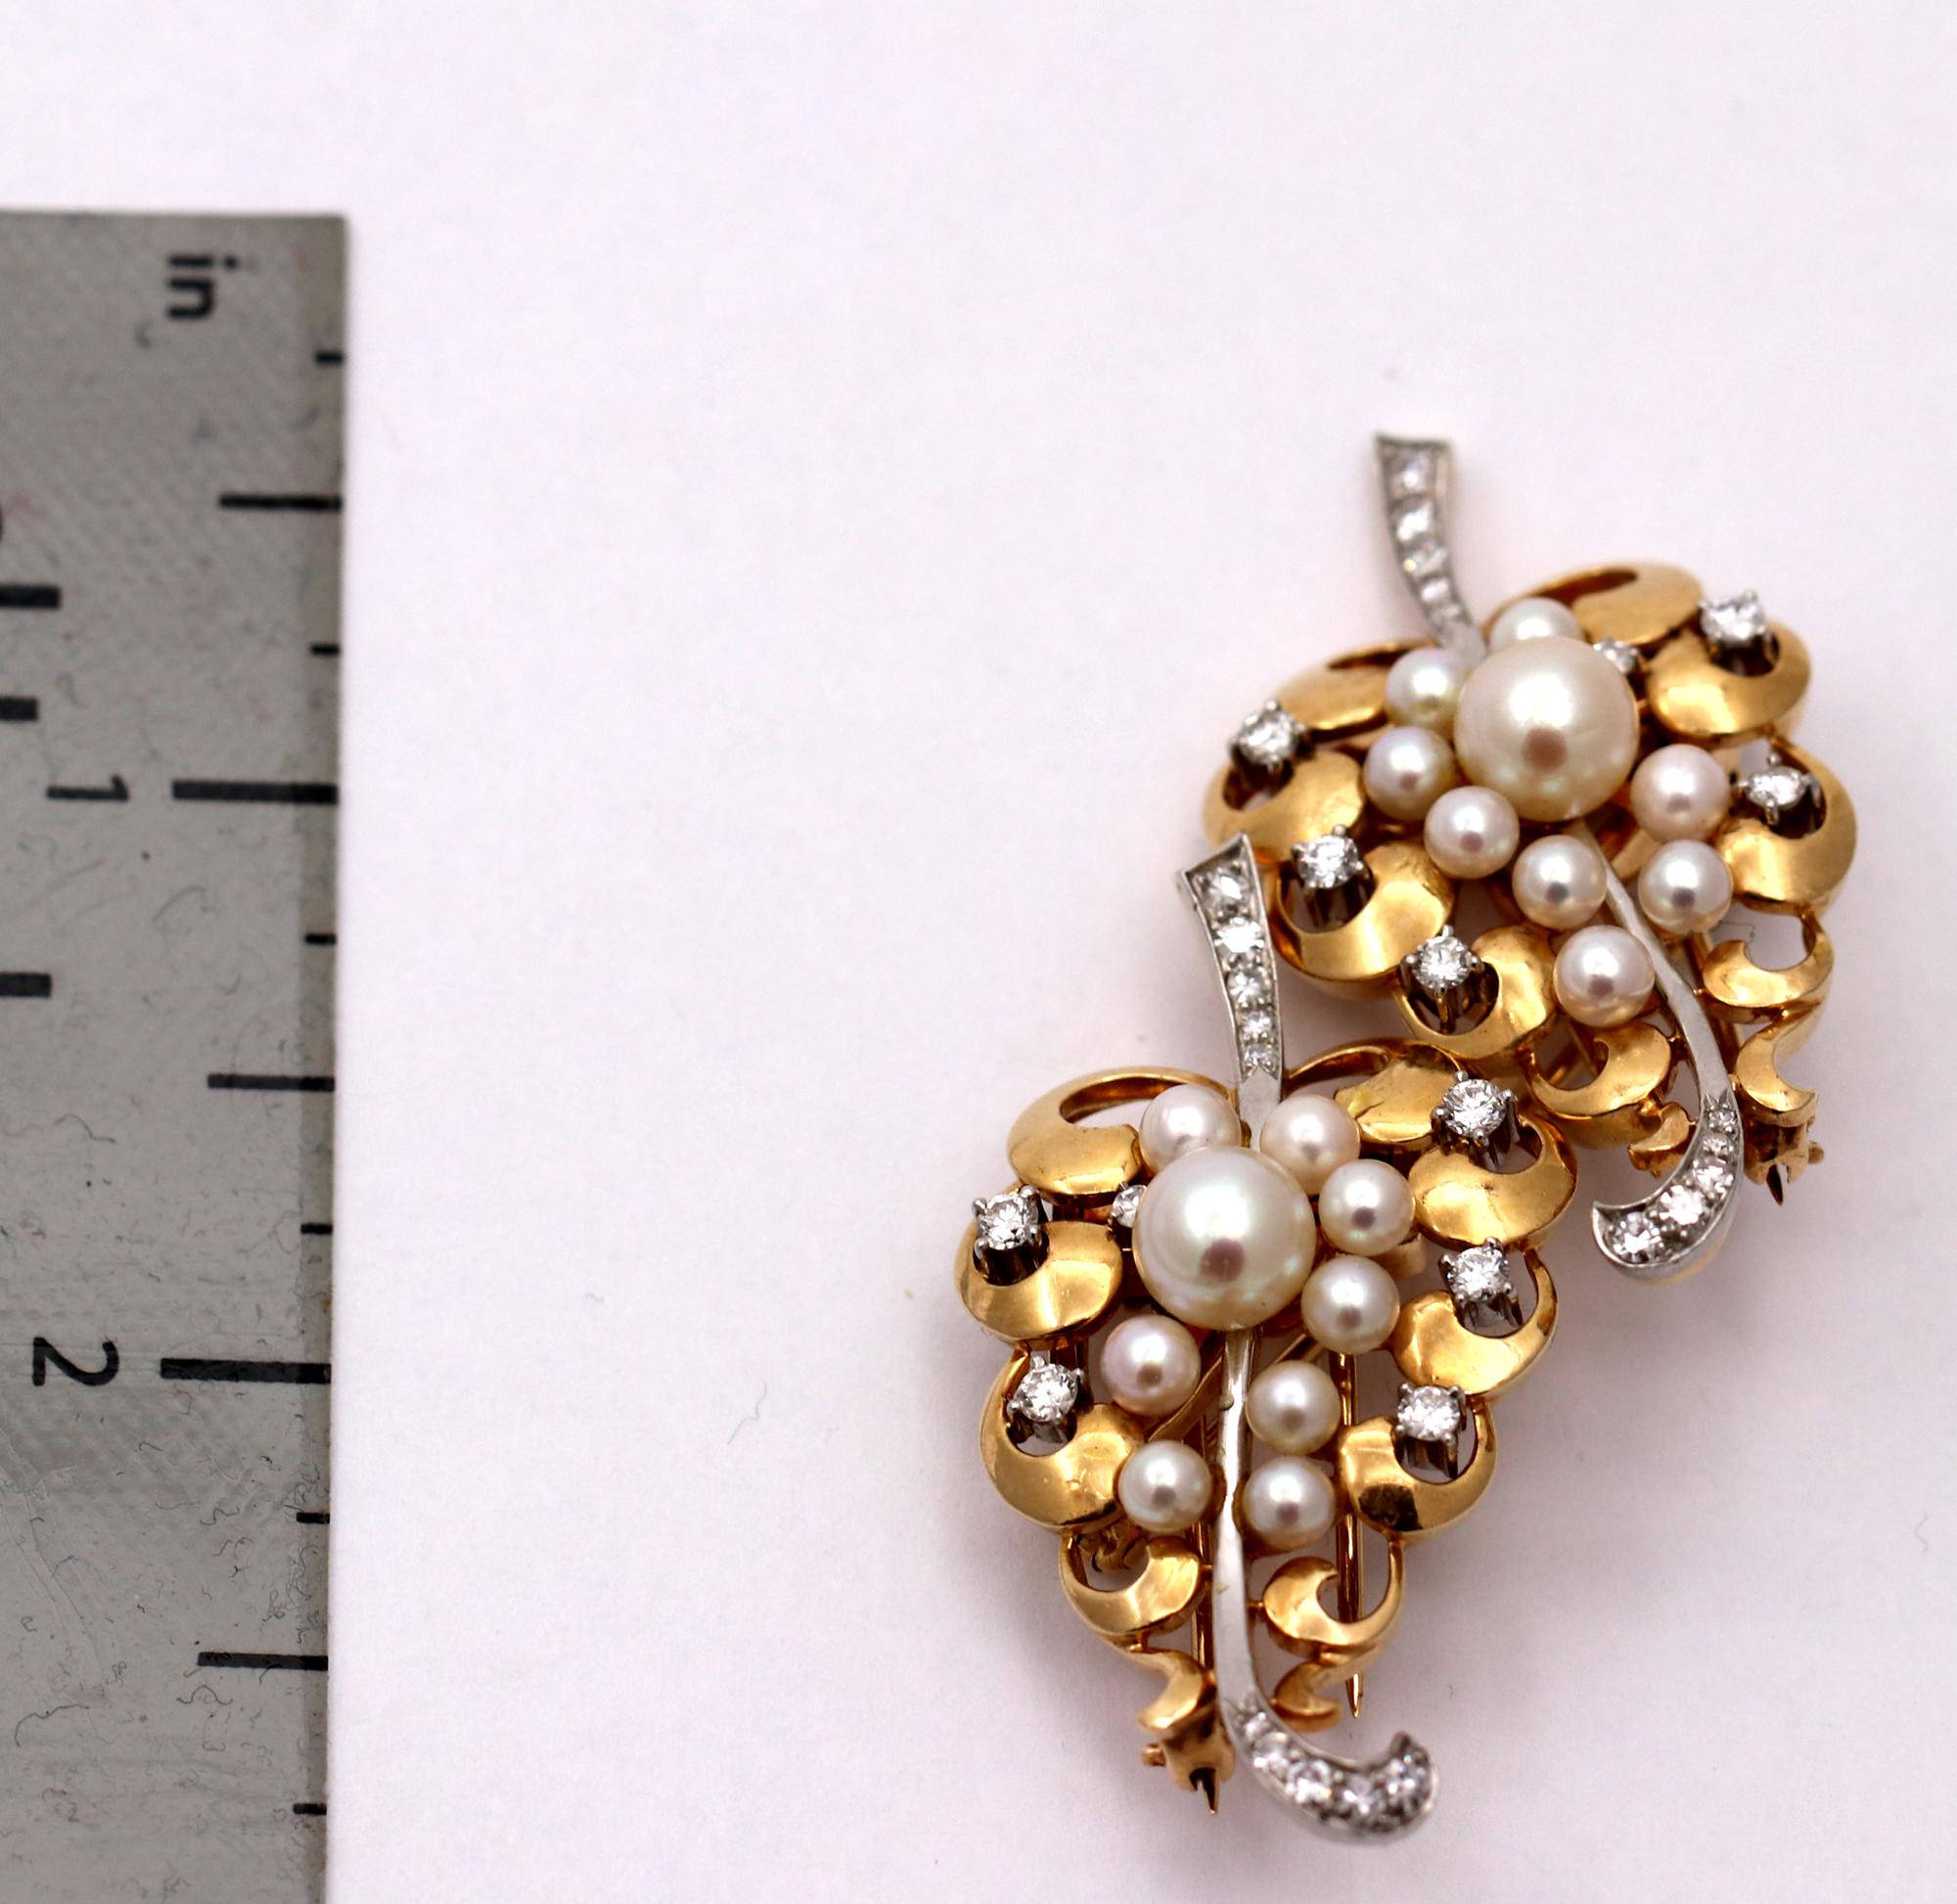 Women's Midcentury Victorian Inspired Gold Double Clips with Diamonds and Pearls